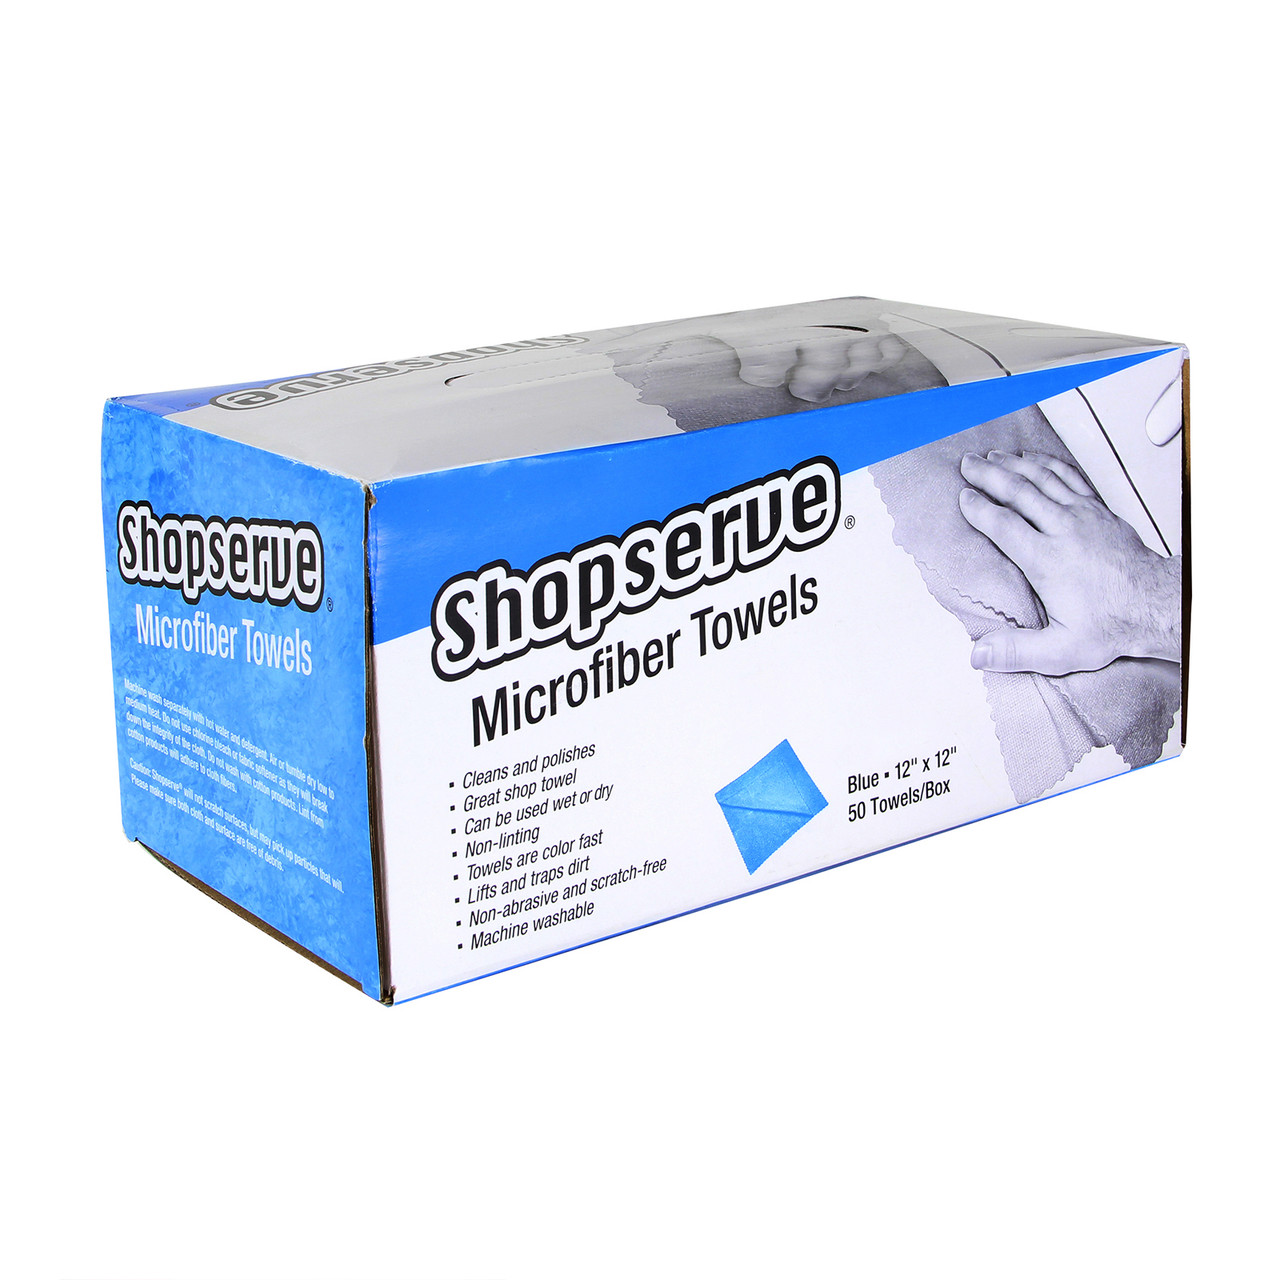 https://cdn11.bigcommerce.com/s-a5uwe4c7wz/images/stencil/1280x1280/products/902/2241/Shopserve-Microfiber-Towels-in-Dispensing-Boxes-Blue-Box-Closed-NS__39902.1638473654.jpg?c=1